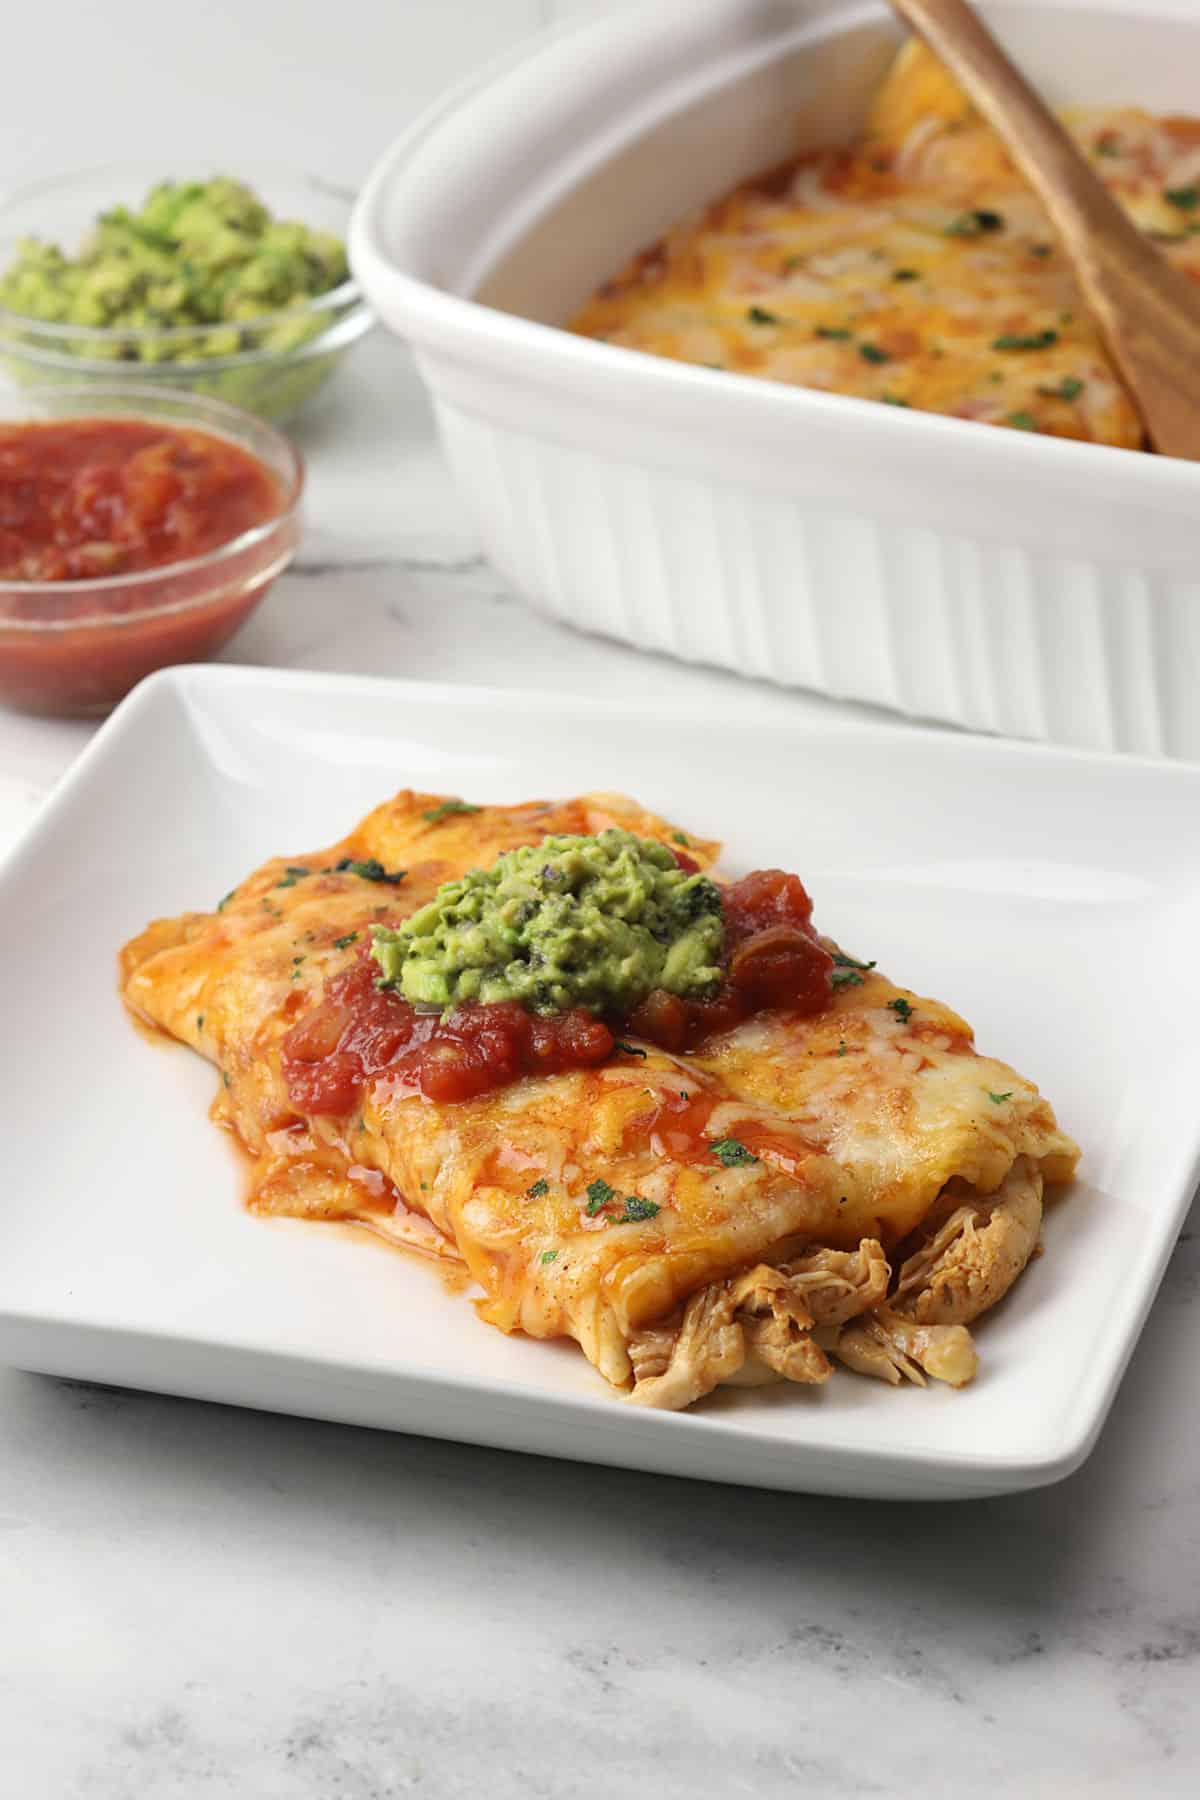 Two chicken enchiladas on a white diner plate topped with salsa and guacamole.